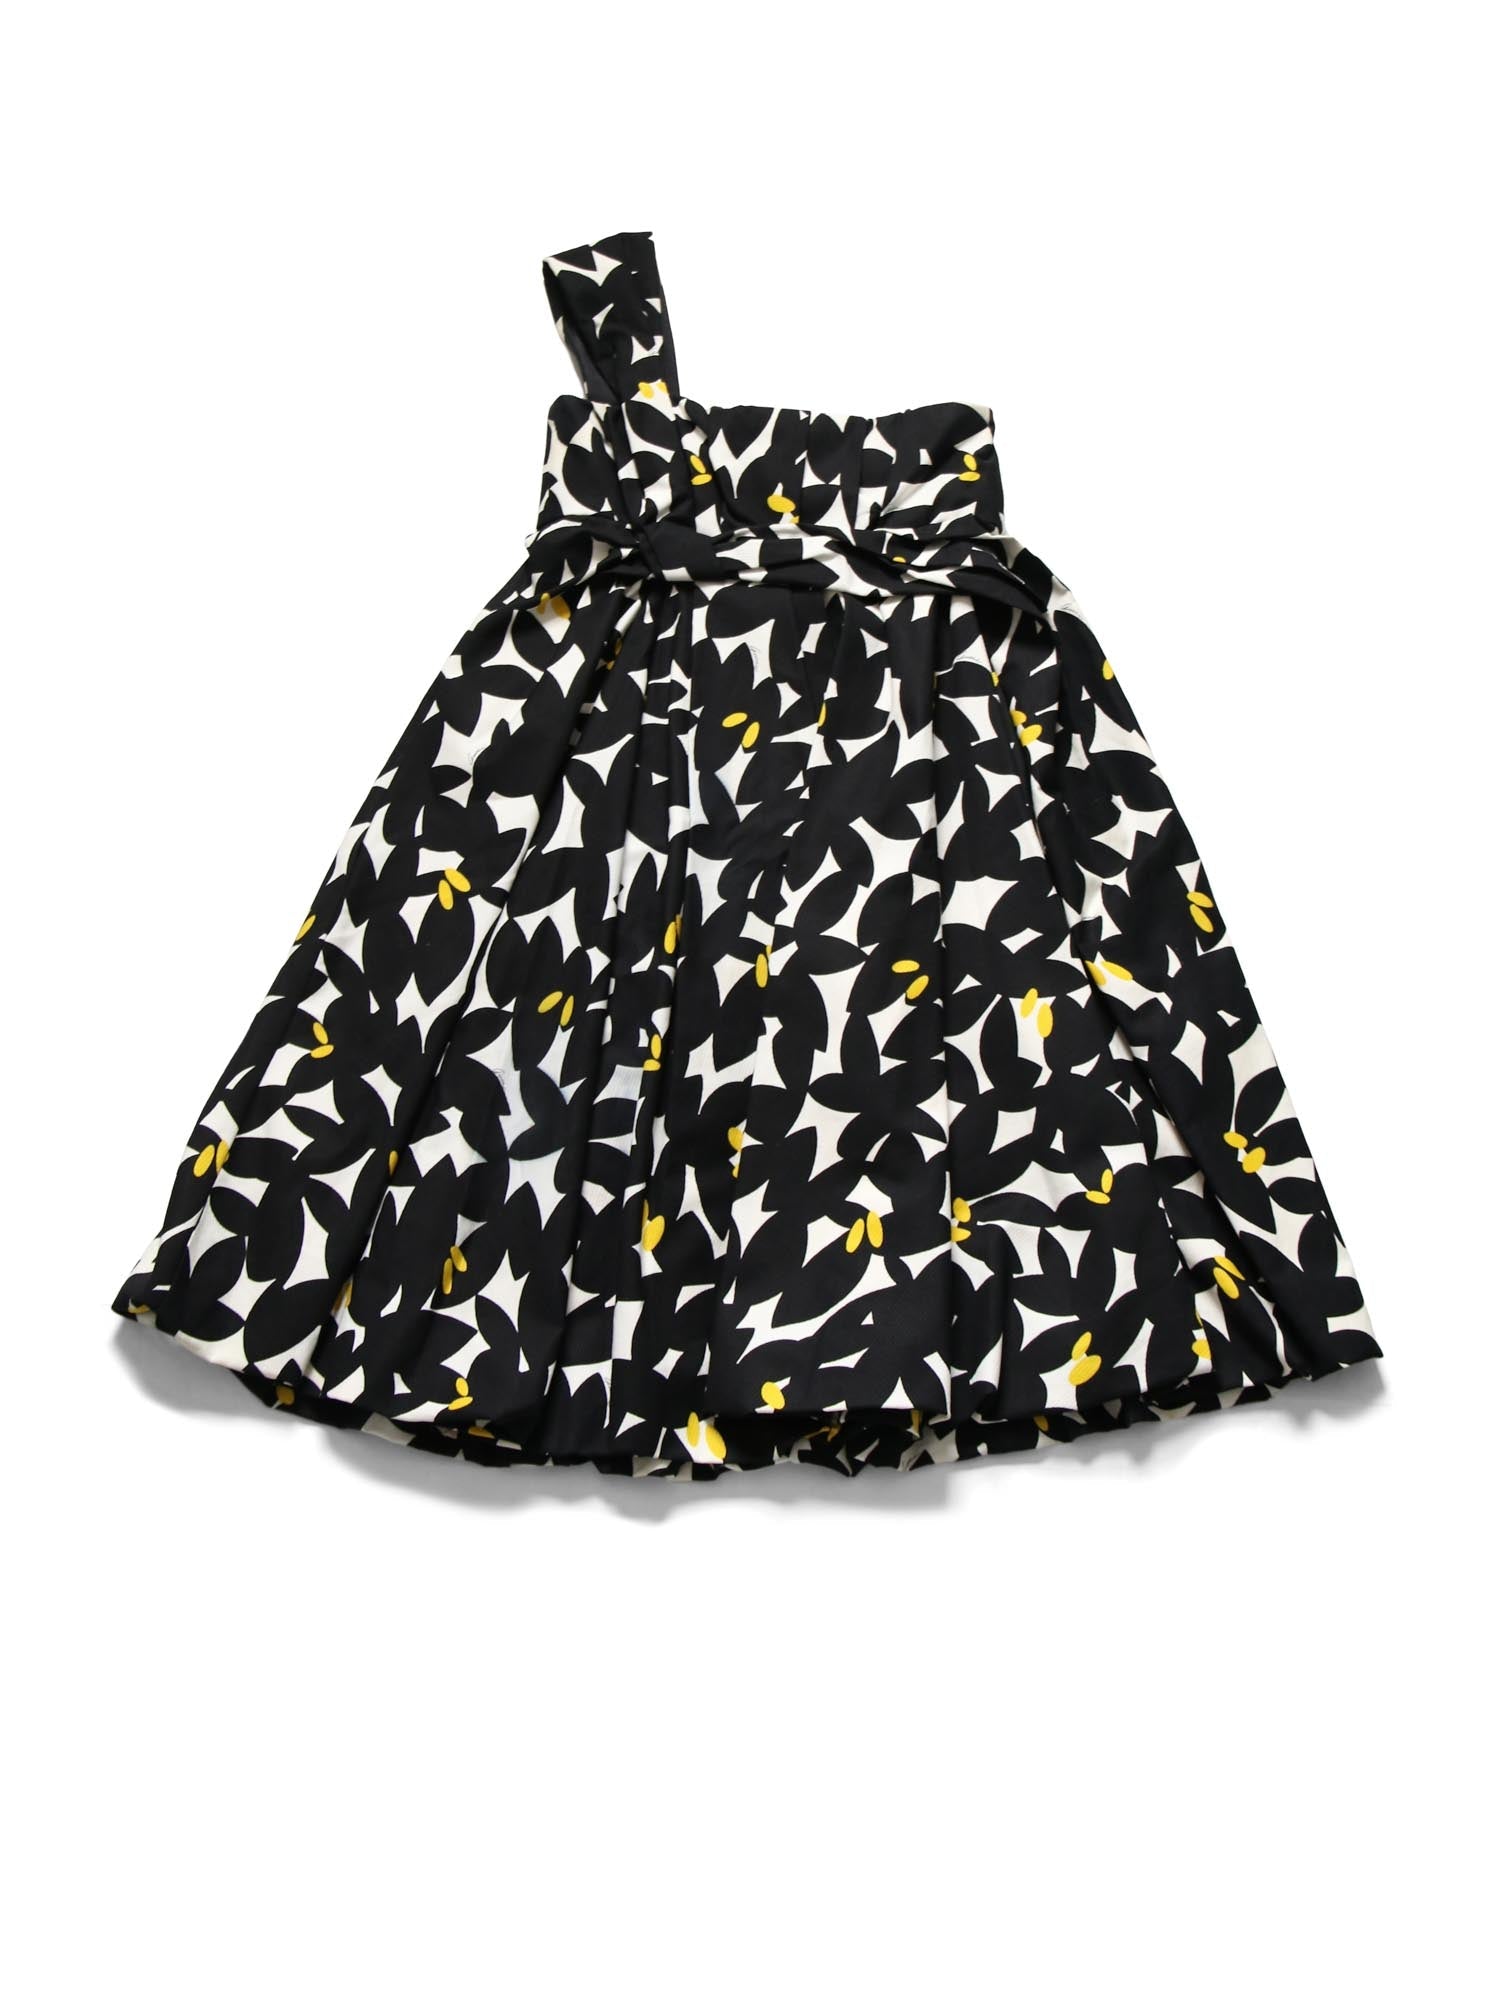 Gucci Logo Floral Pleated Dress Black White Yellow